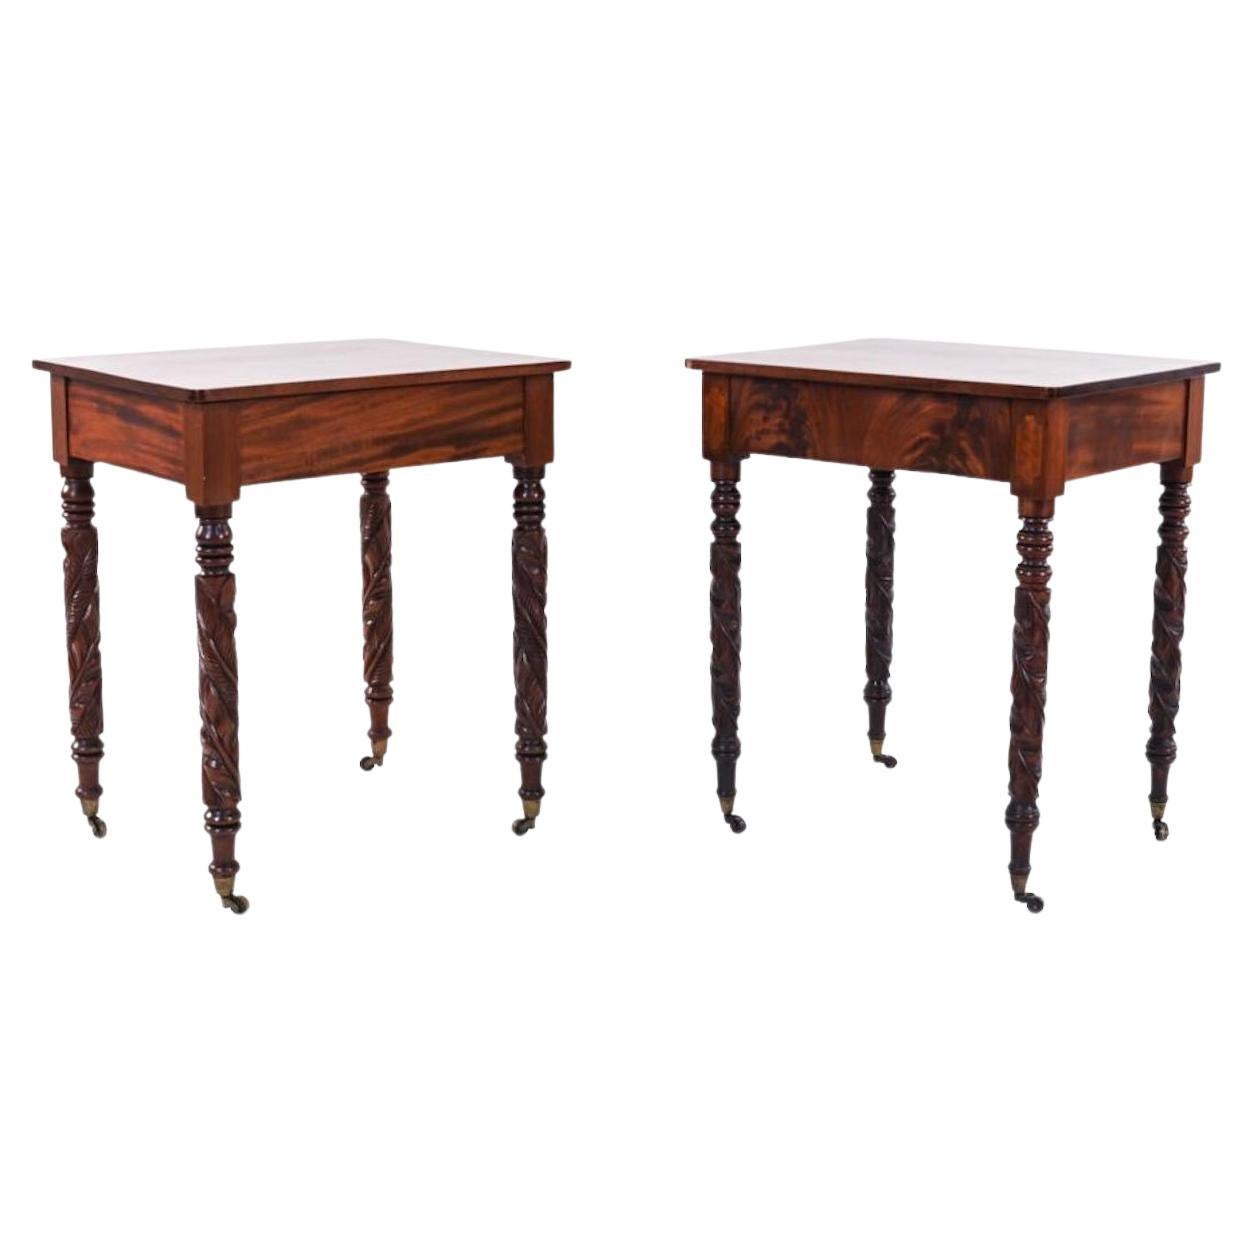 Two American Mahogany Late Federal Style Side or End Tables